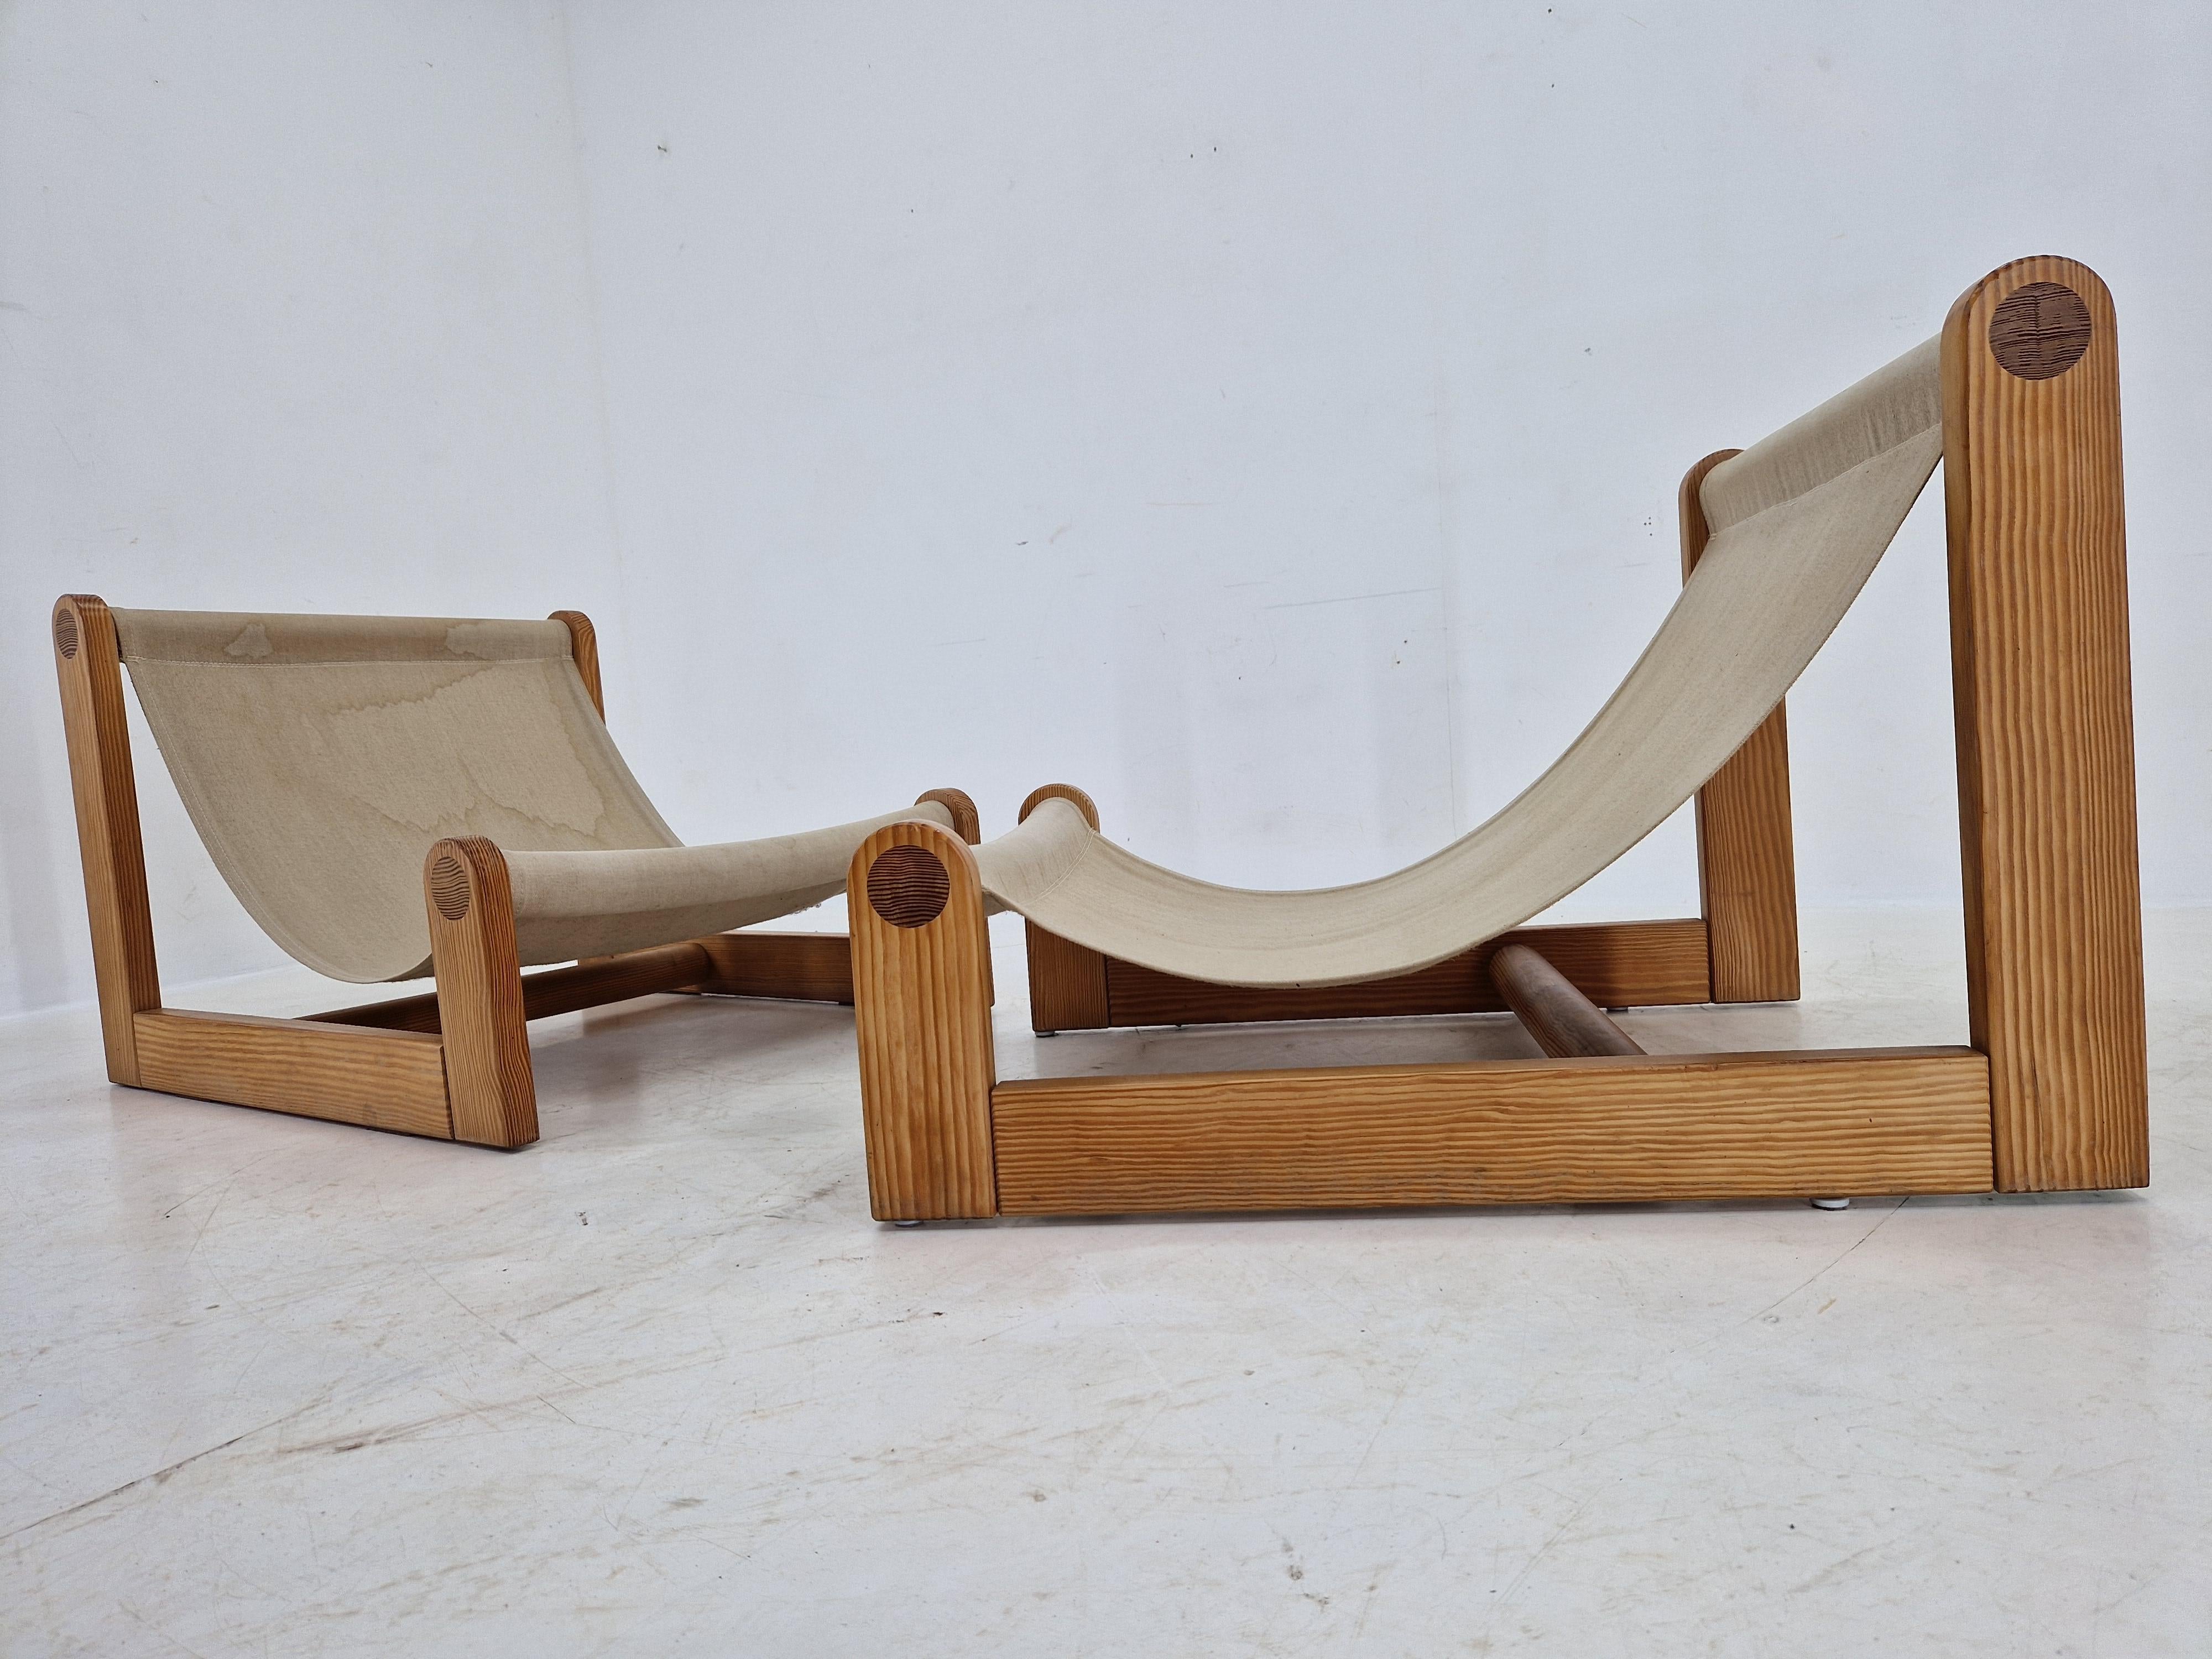 Pair of Midcentury Rare Lounge Chairs Pine Wood, Denmark, 1960s For Sale 6